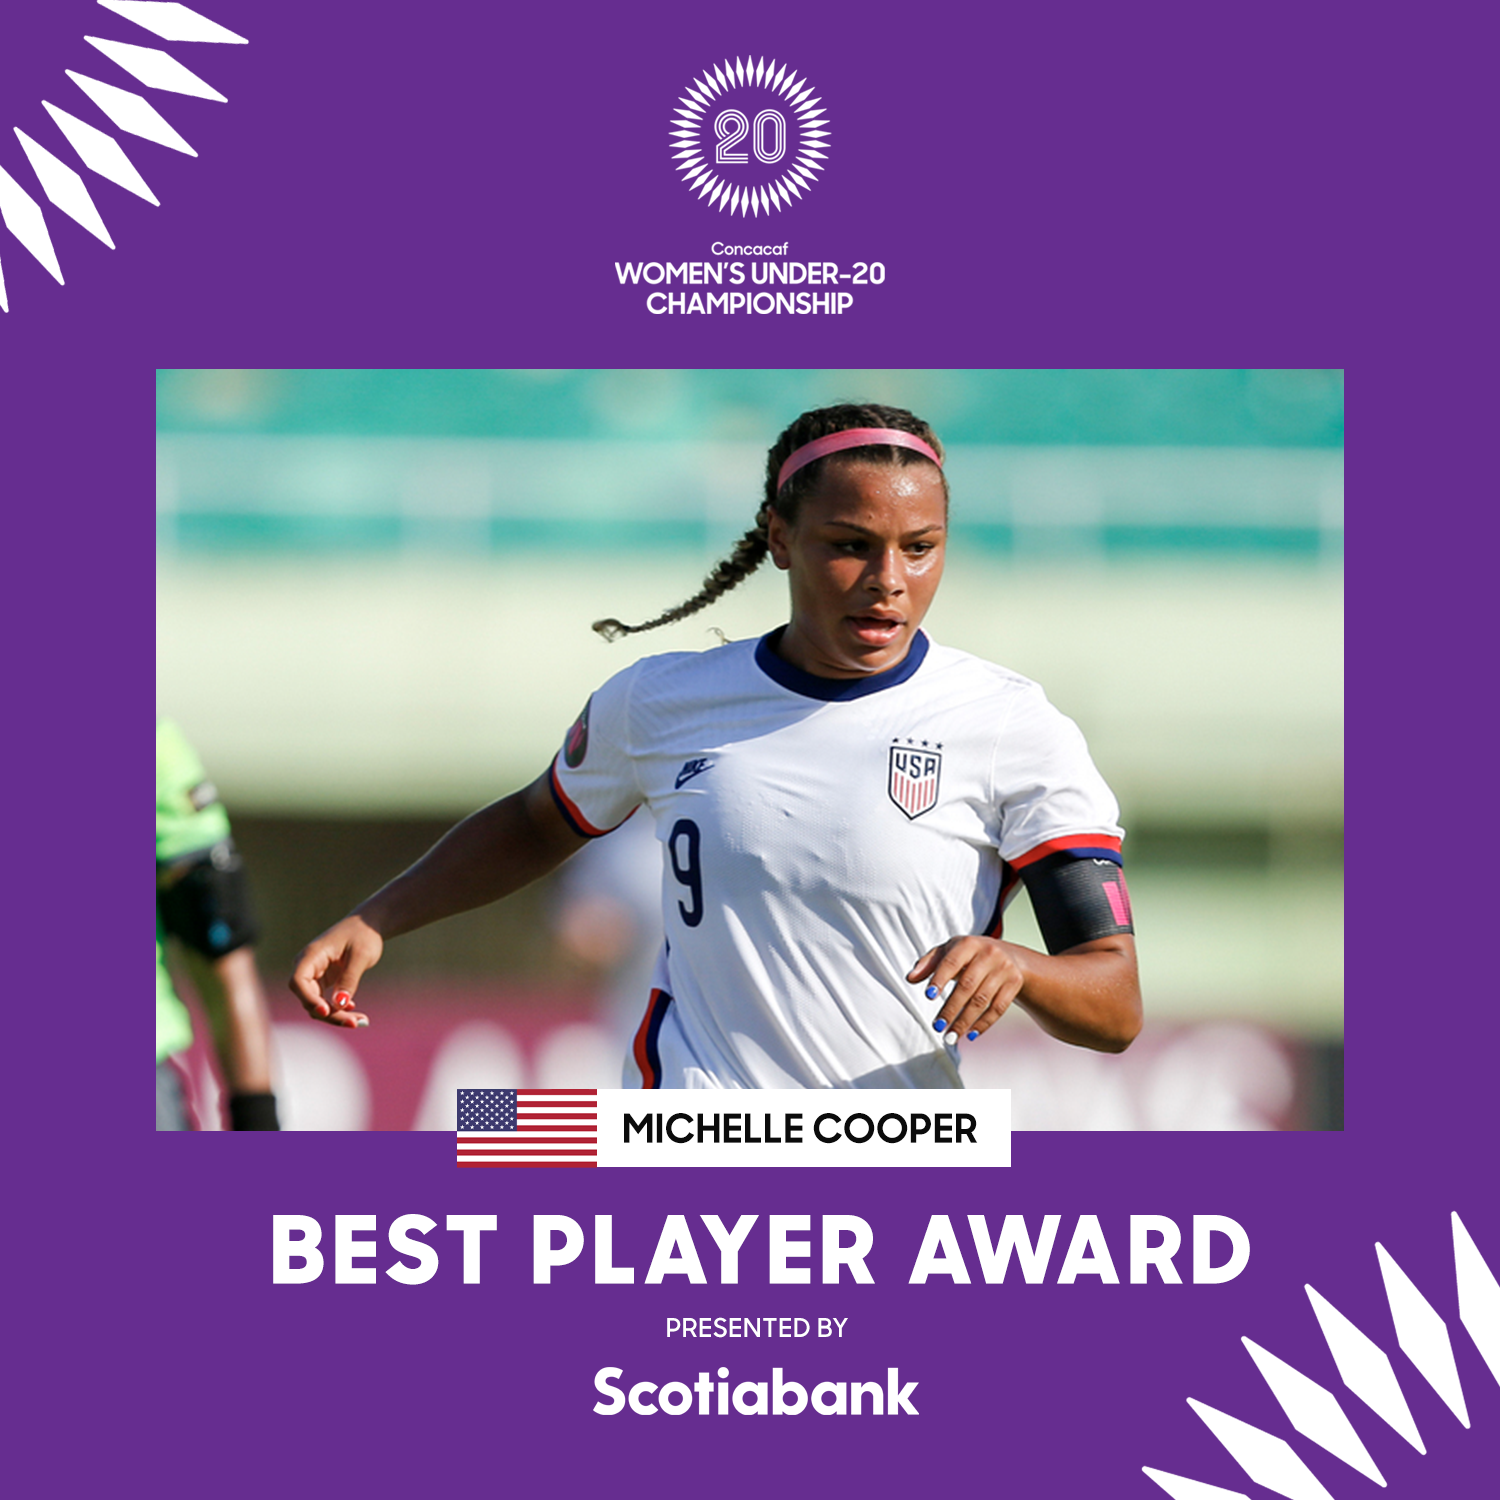 Michelle Cooper, Best Player Award presented by Scotiabank